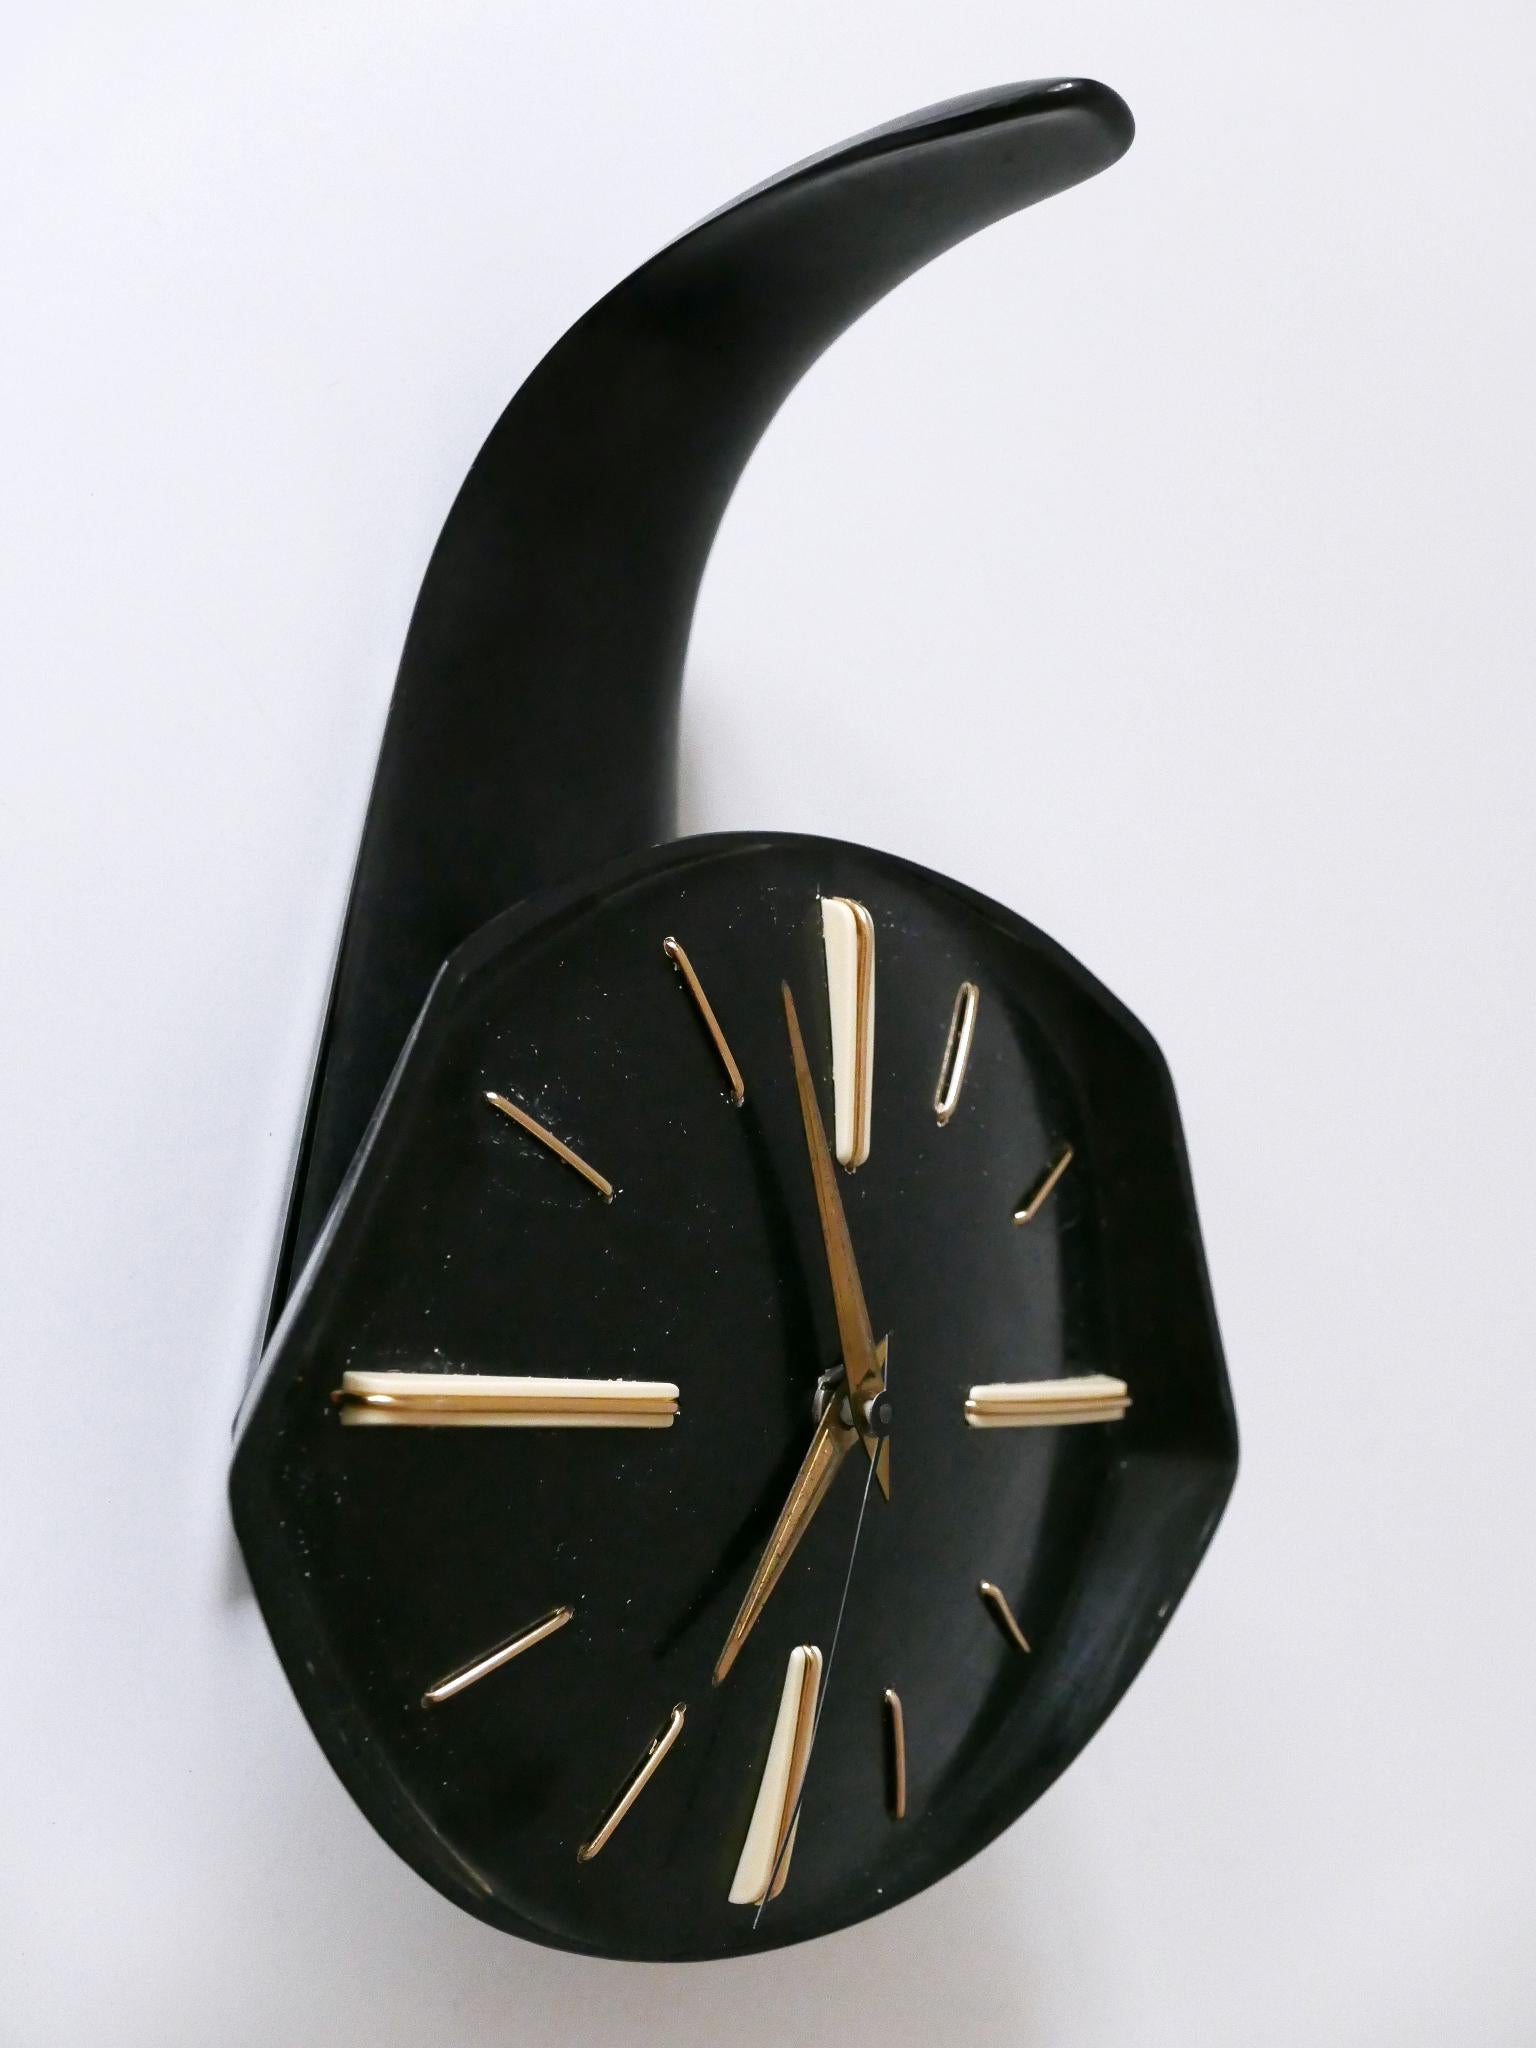 Rare and Lovely Mid-Century Modern Bakelite Table or Wall Clock by PRIM 1950s For Sale 3